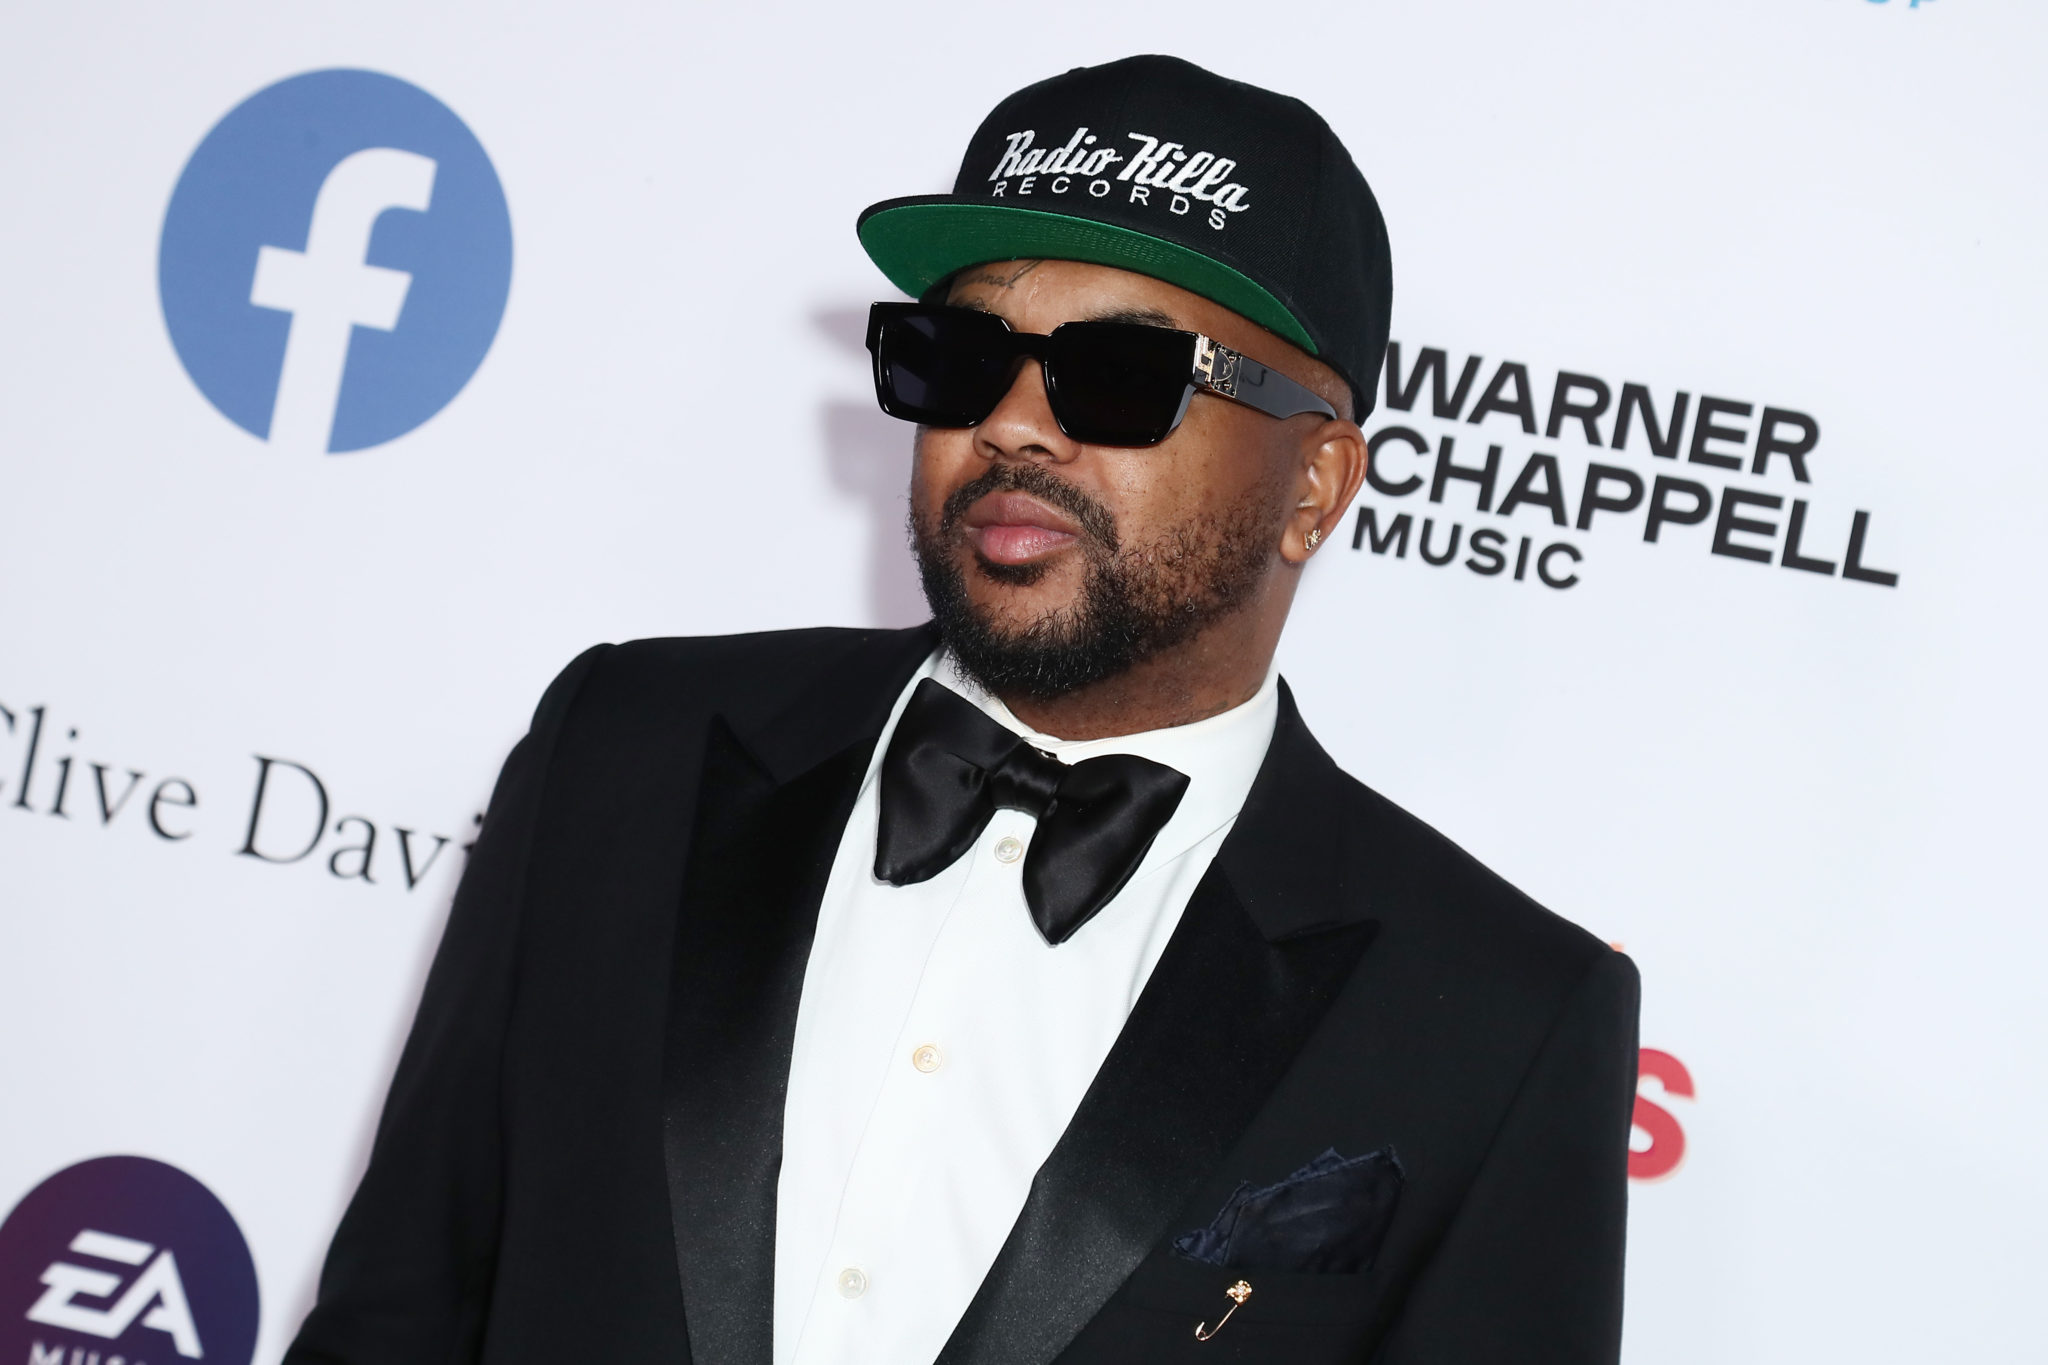 ‘With All I’ve Done This Is What Y’all Have For Me’: The-Dream Responds ...